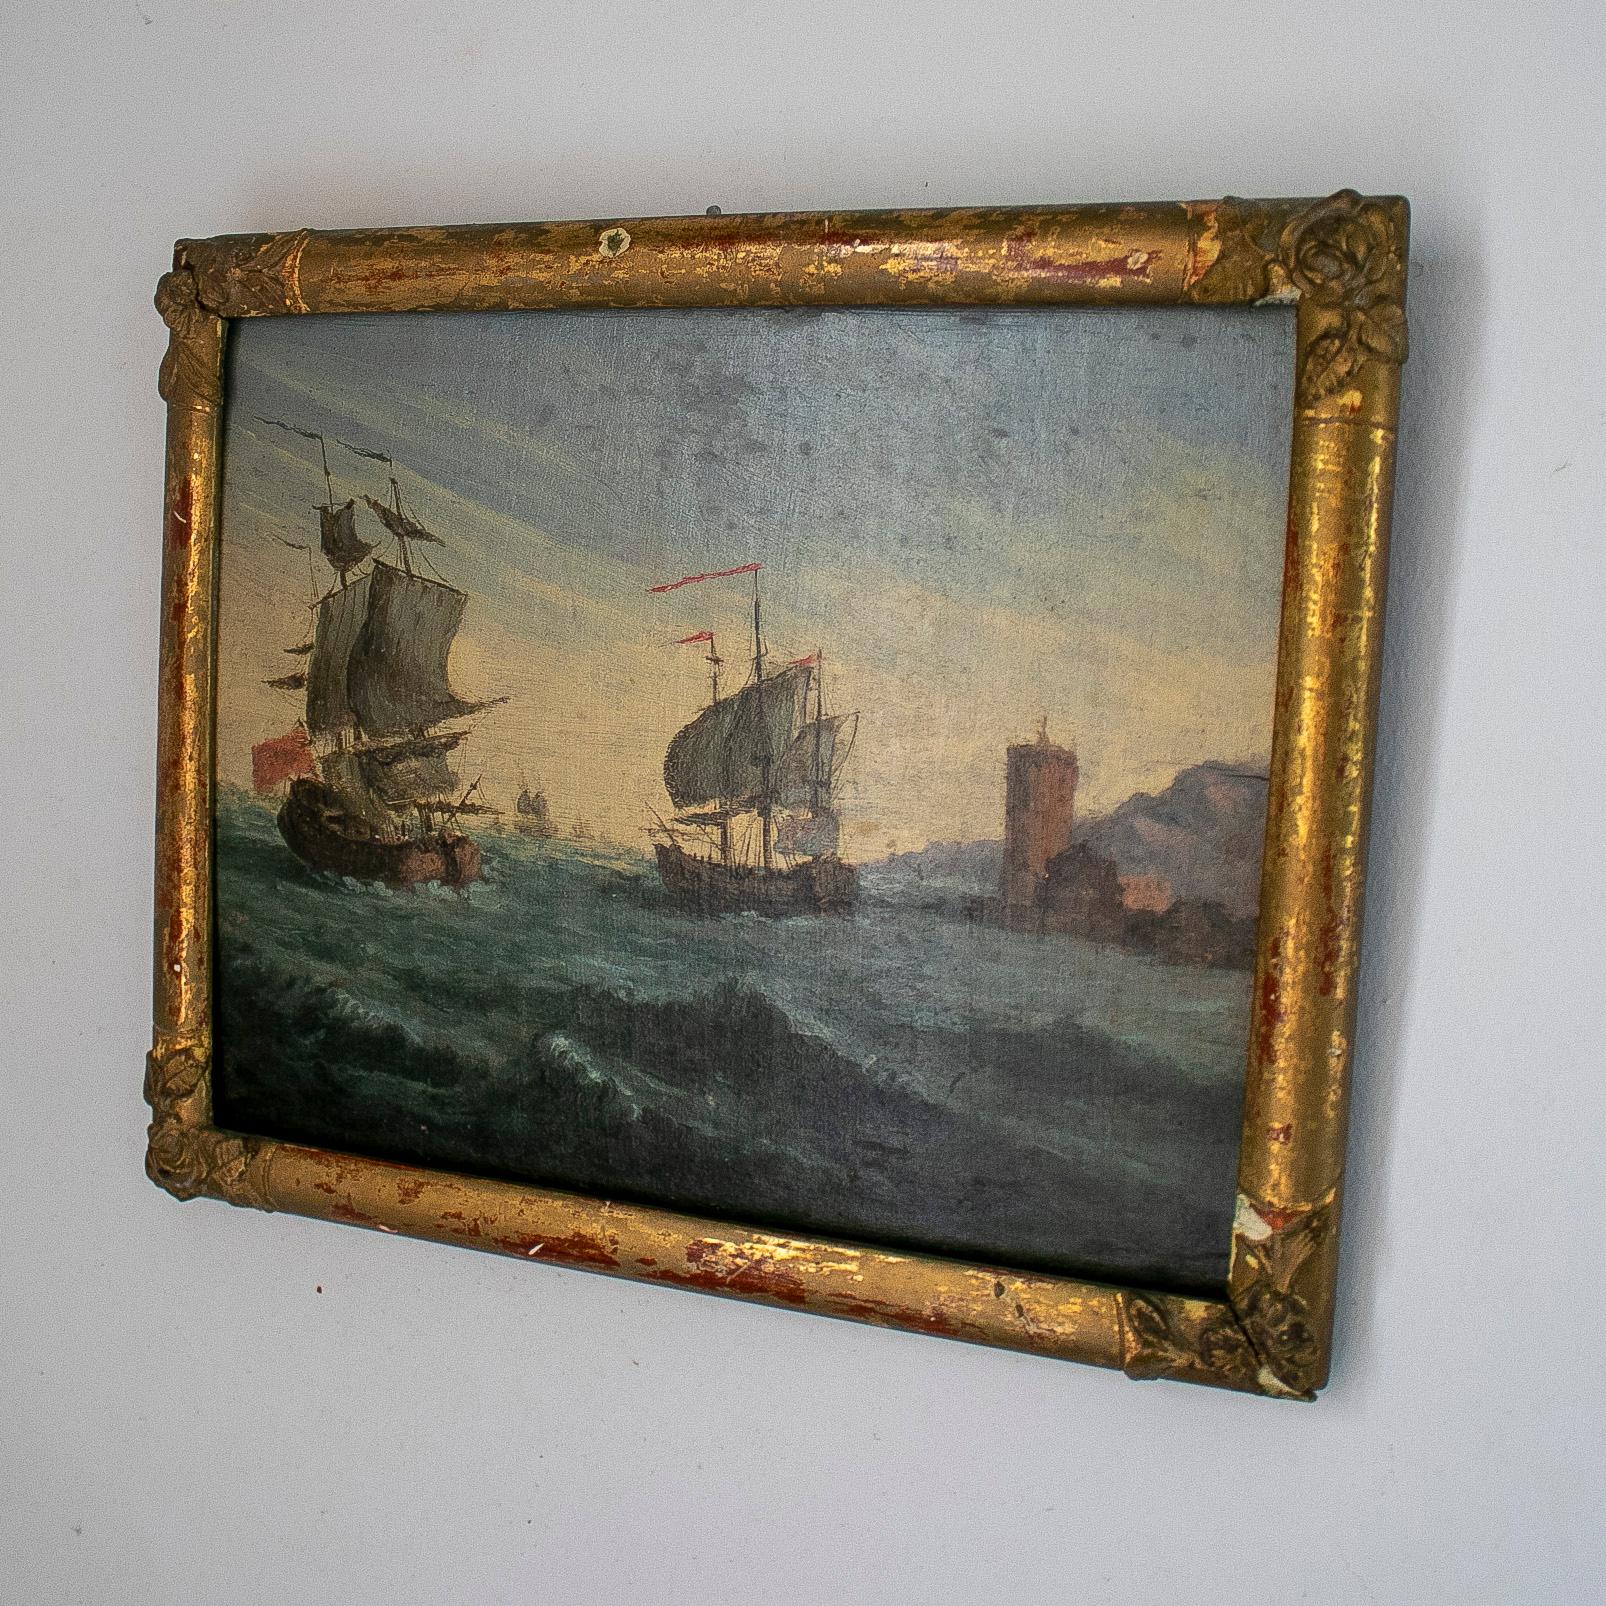 Antique 19th century English oil on canvas marina painting with giltwood frame

Frame measurements: 29 x 24 x 1,5cm.